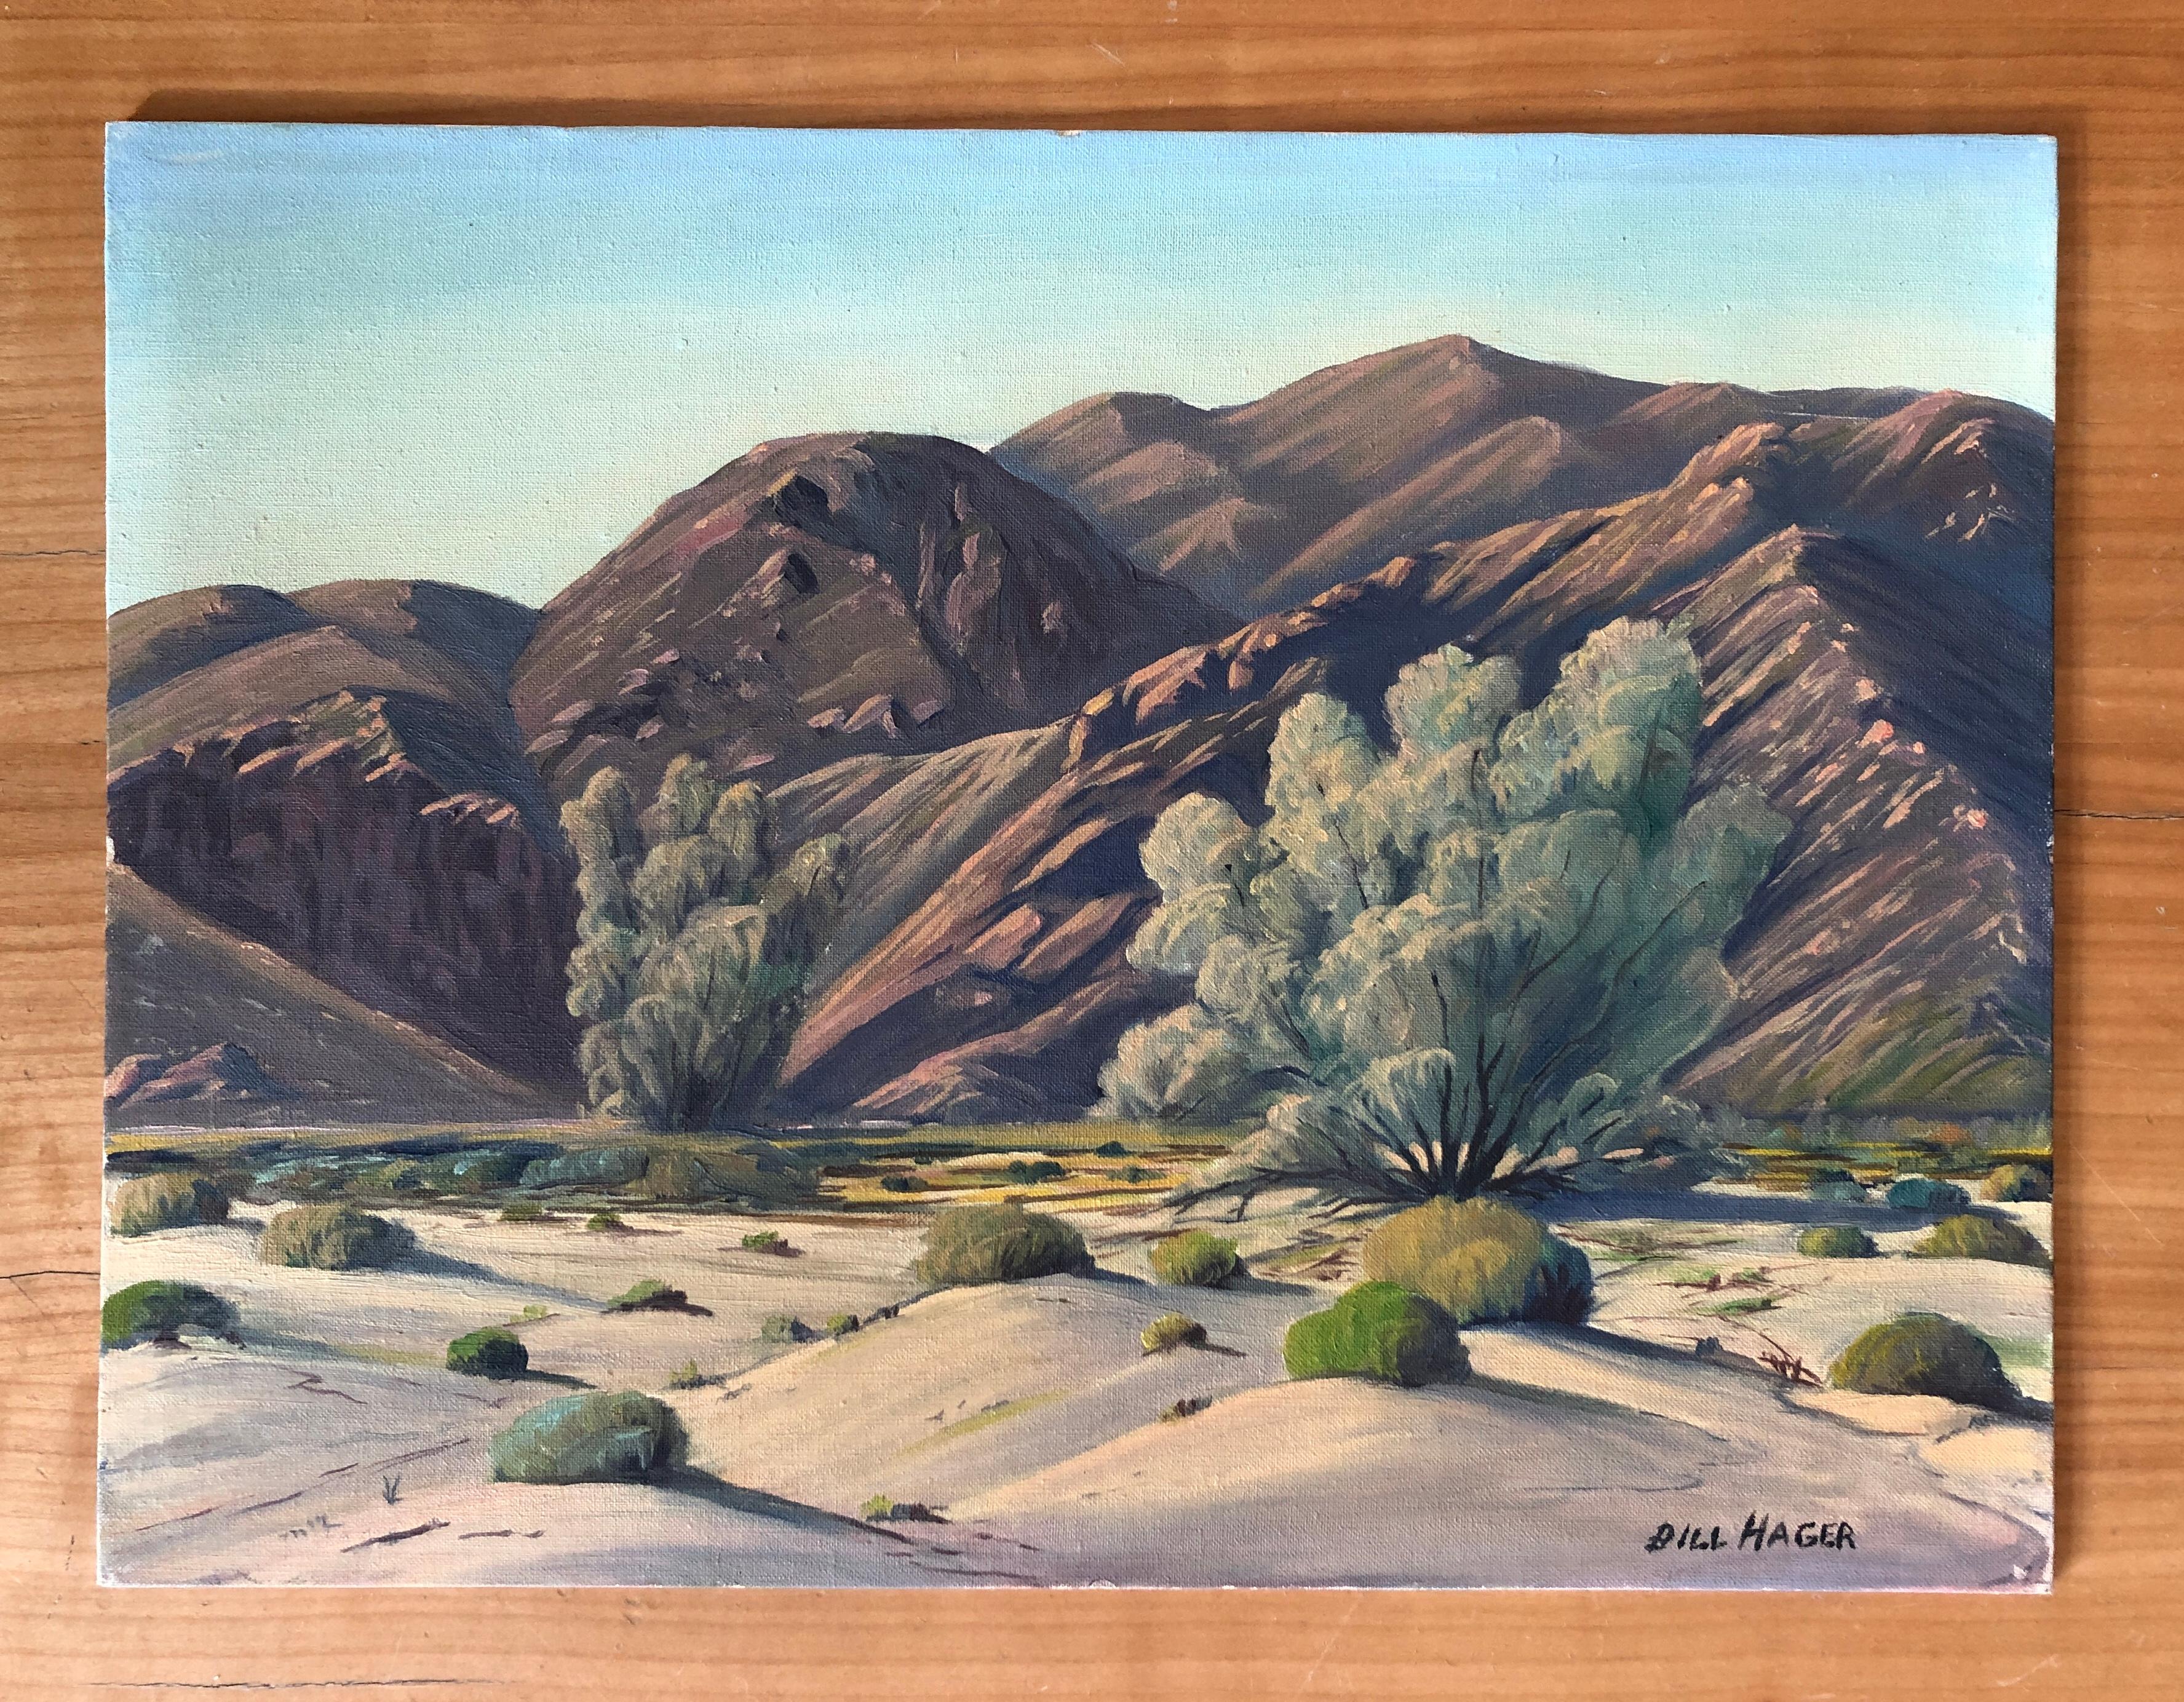 Landscape near Palmsprings - Painting by Bill Hager